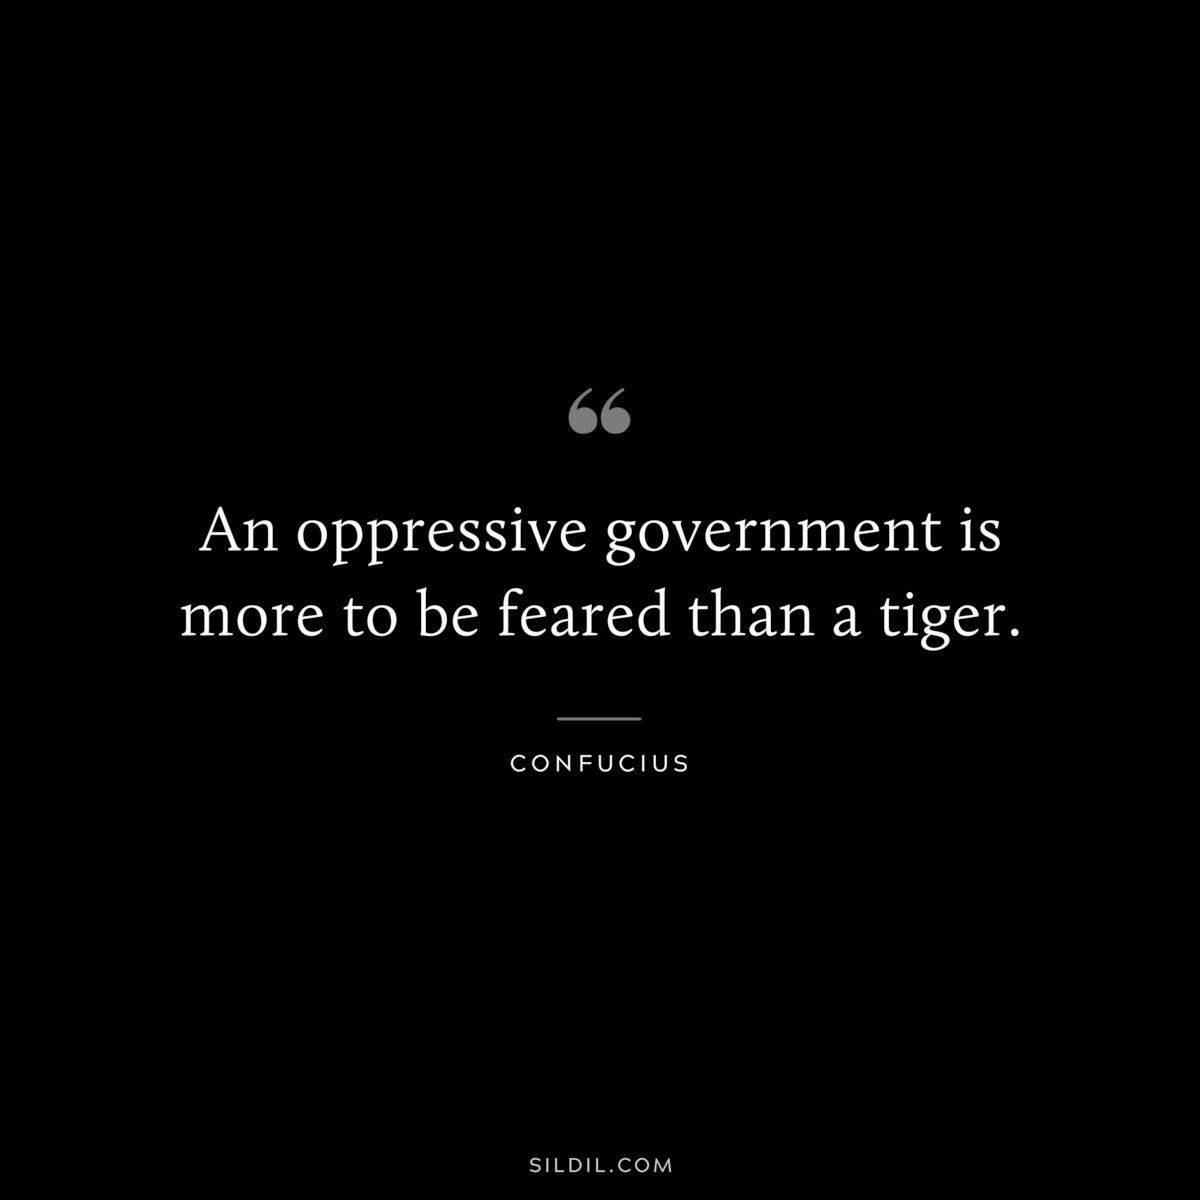 An oppressive government is more to be feared than a tiger. ― Confucius